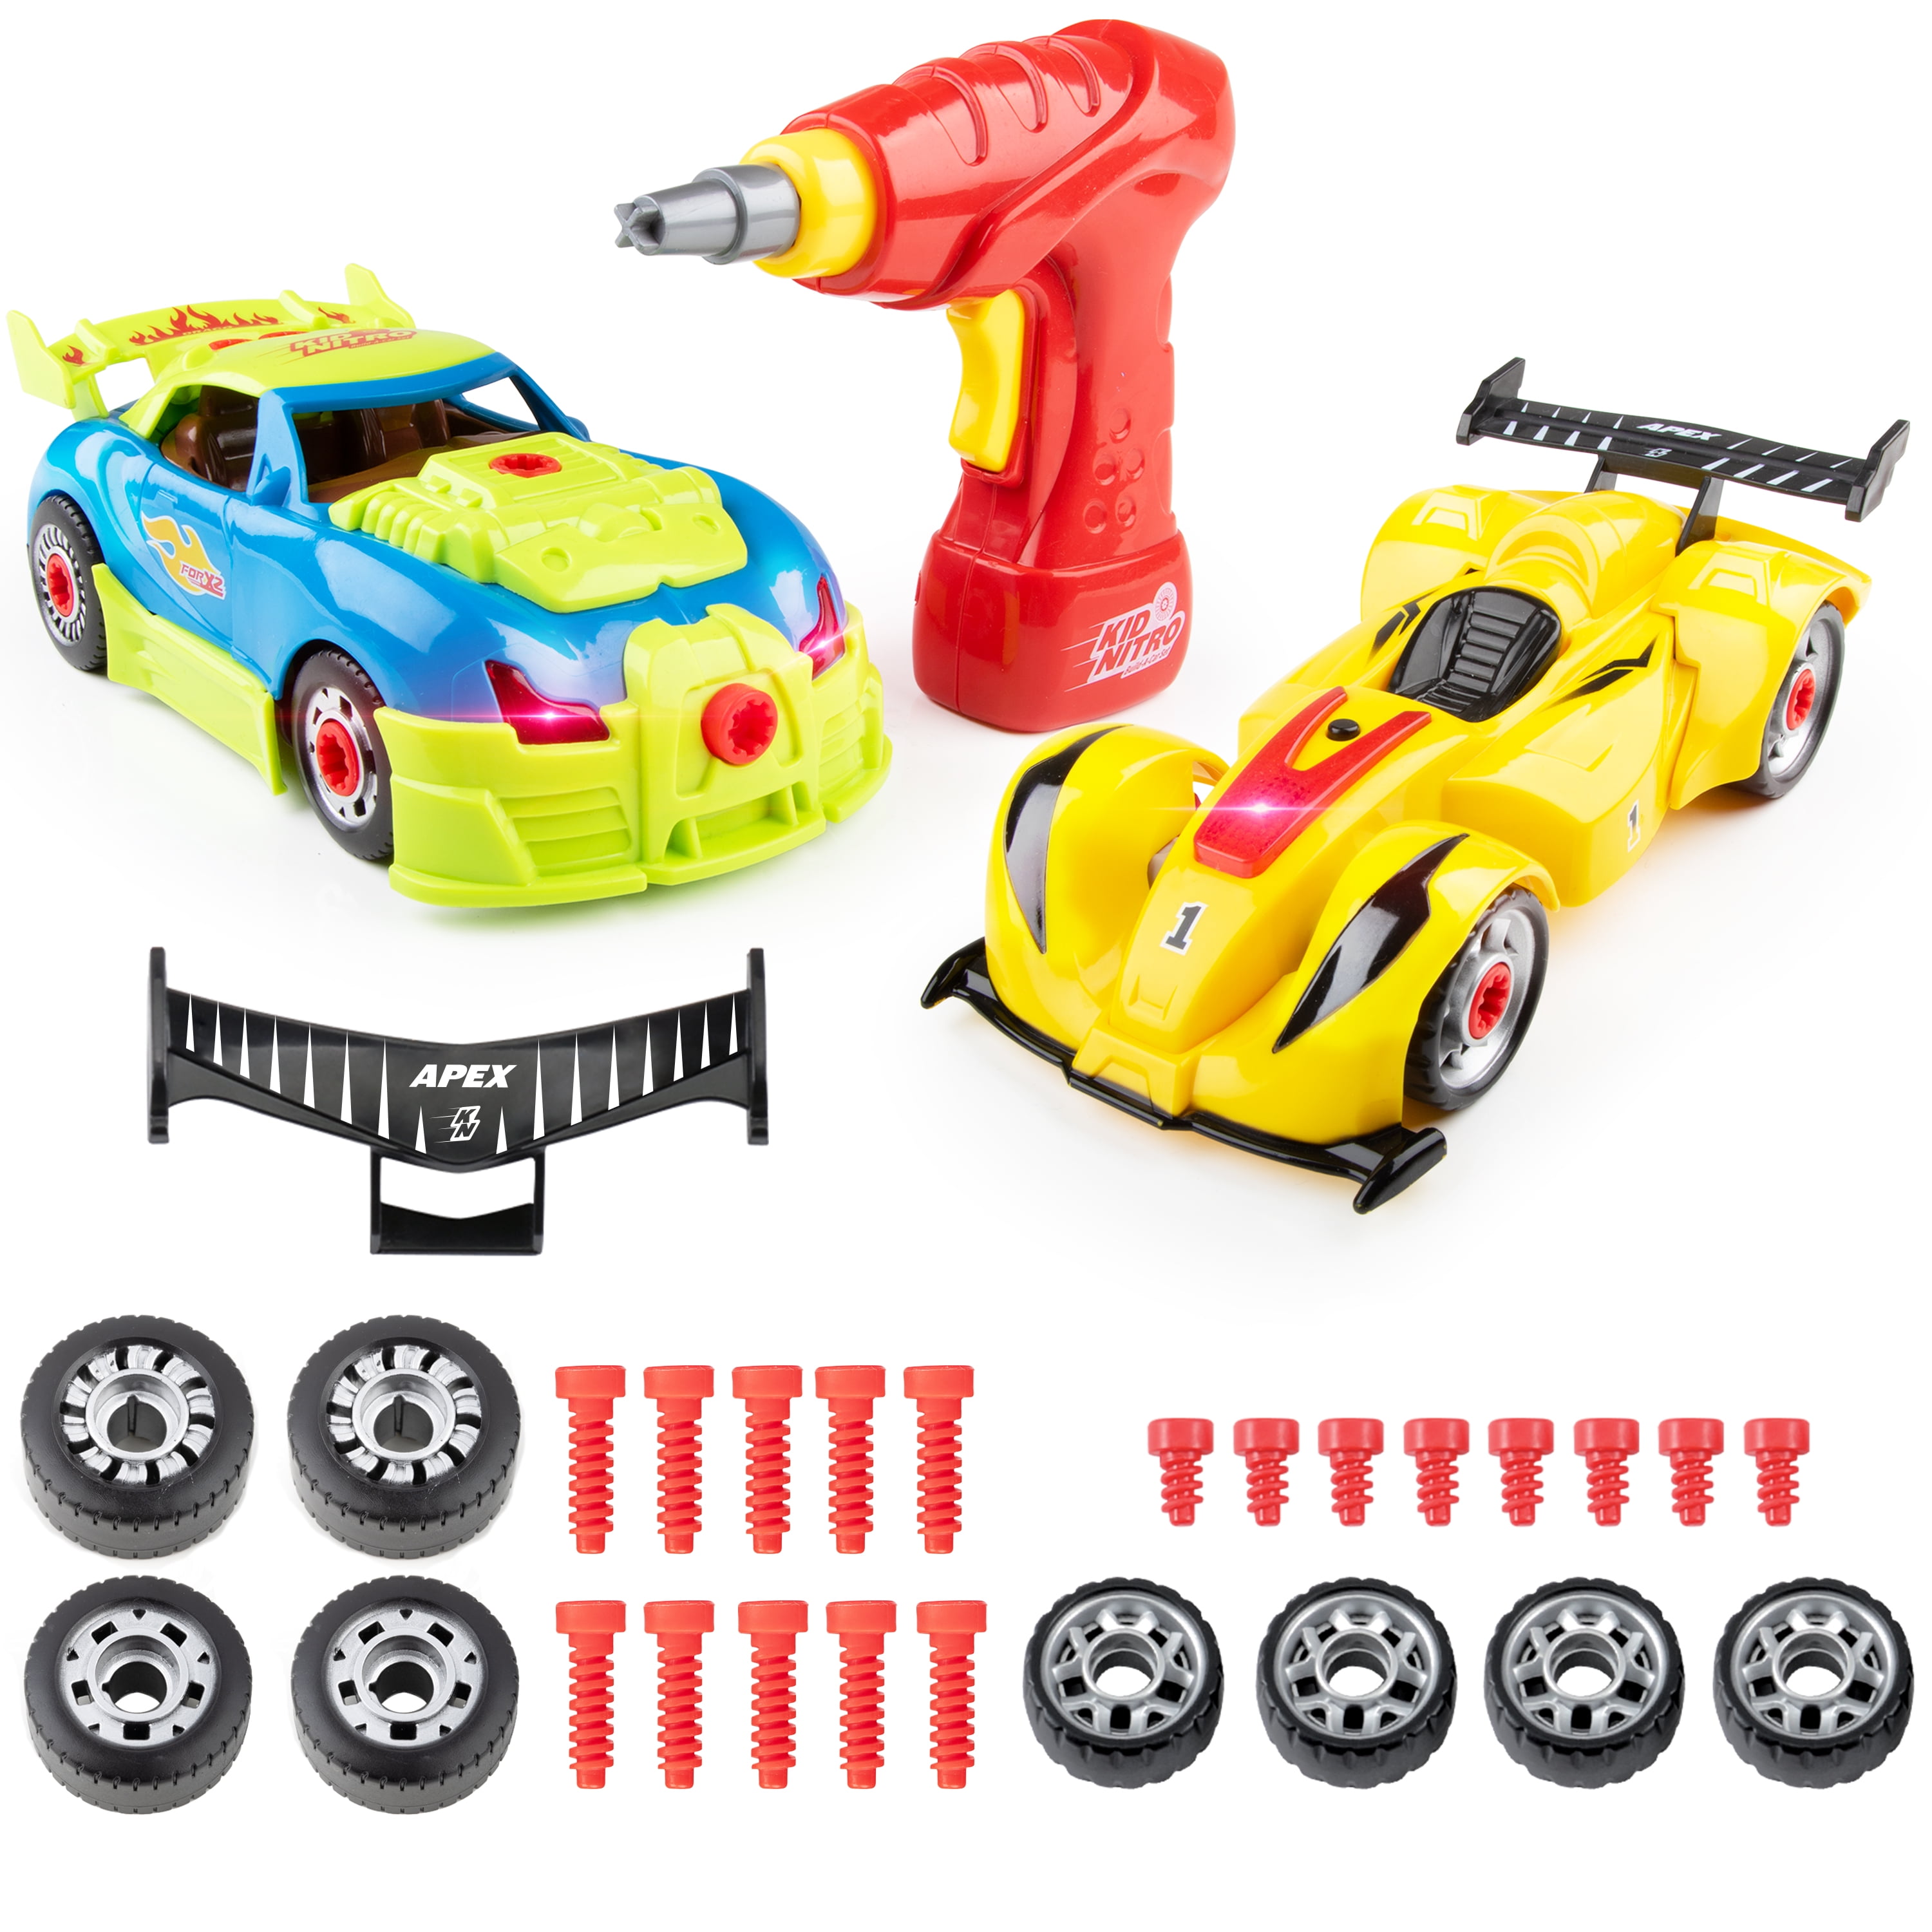 Take Apart Car Toy Racing Kit Construction Stem Learning Race Engine Building 